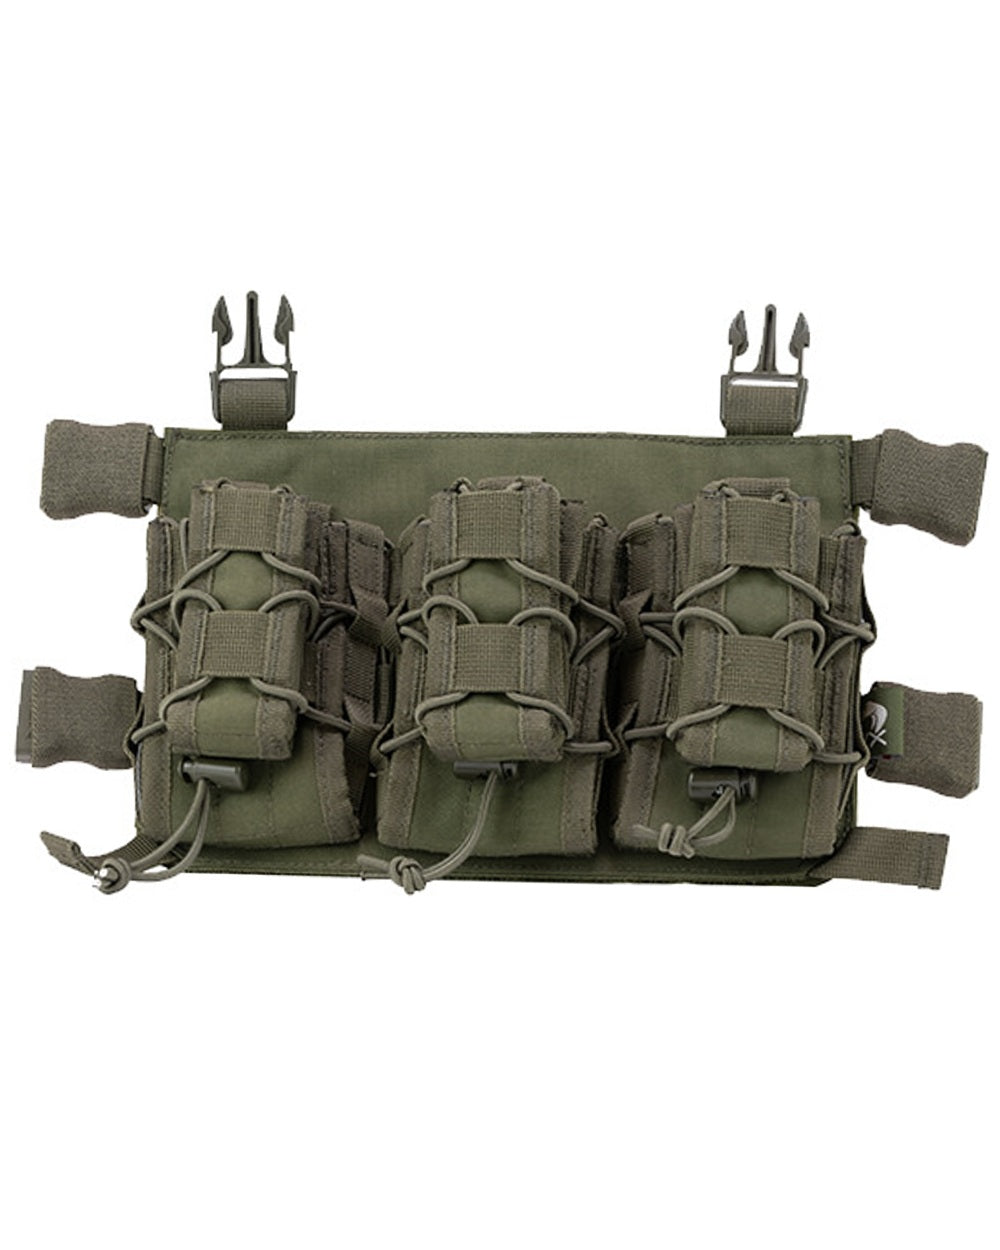 Viper VX Buckle Up Mag Rig in Green 